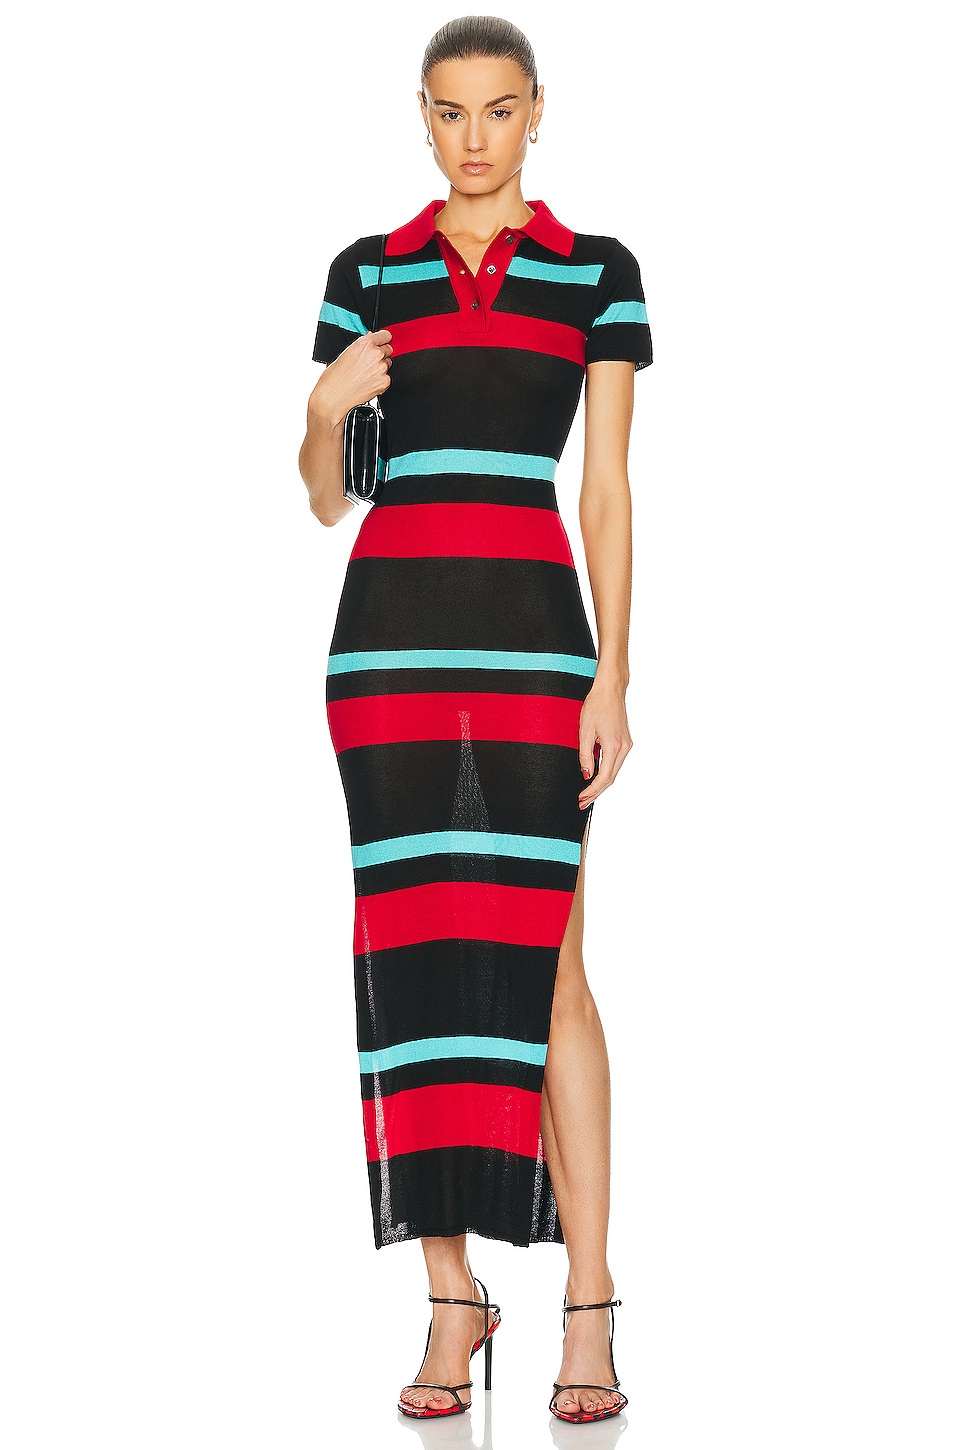 Image 1 of Louisa Ballou Polo Dress in Black, Red, & Blue